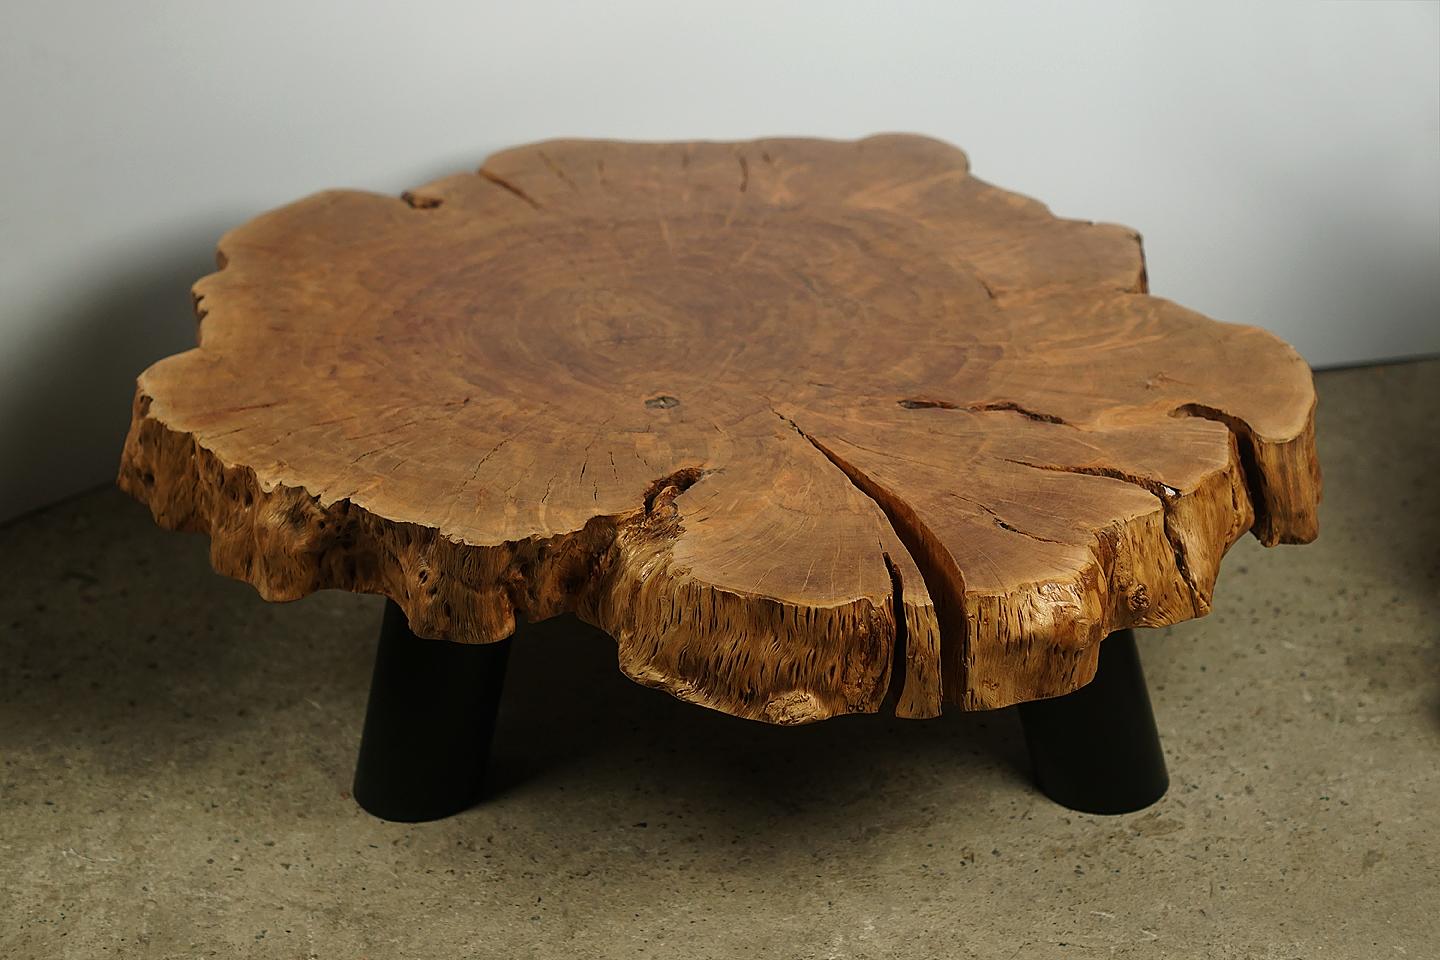 Coffee table, Inhouse production (Designer Cocomaster)

Beautiful organic lychee wood coffee table with stunning erosion detail and legs made of iron coloured black. 
Oiling the root gives its special unique finish.